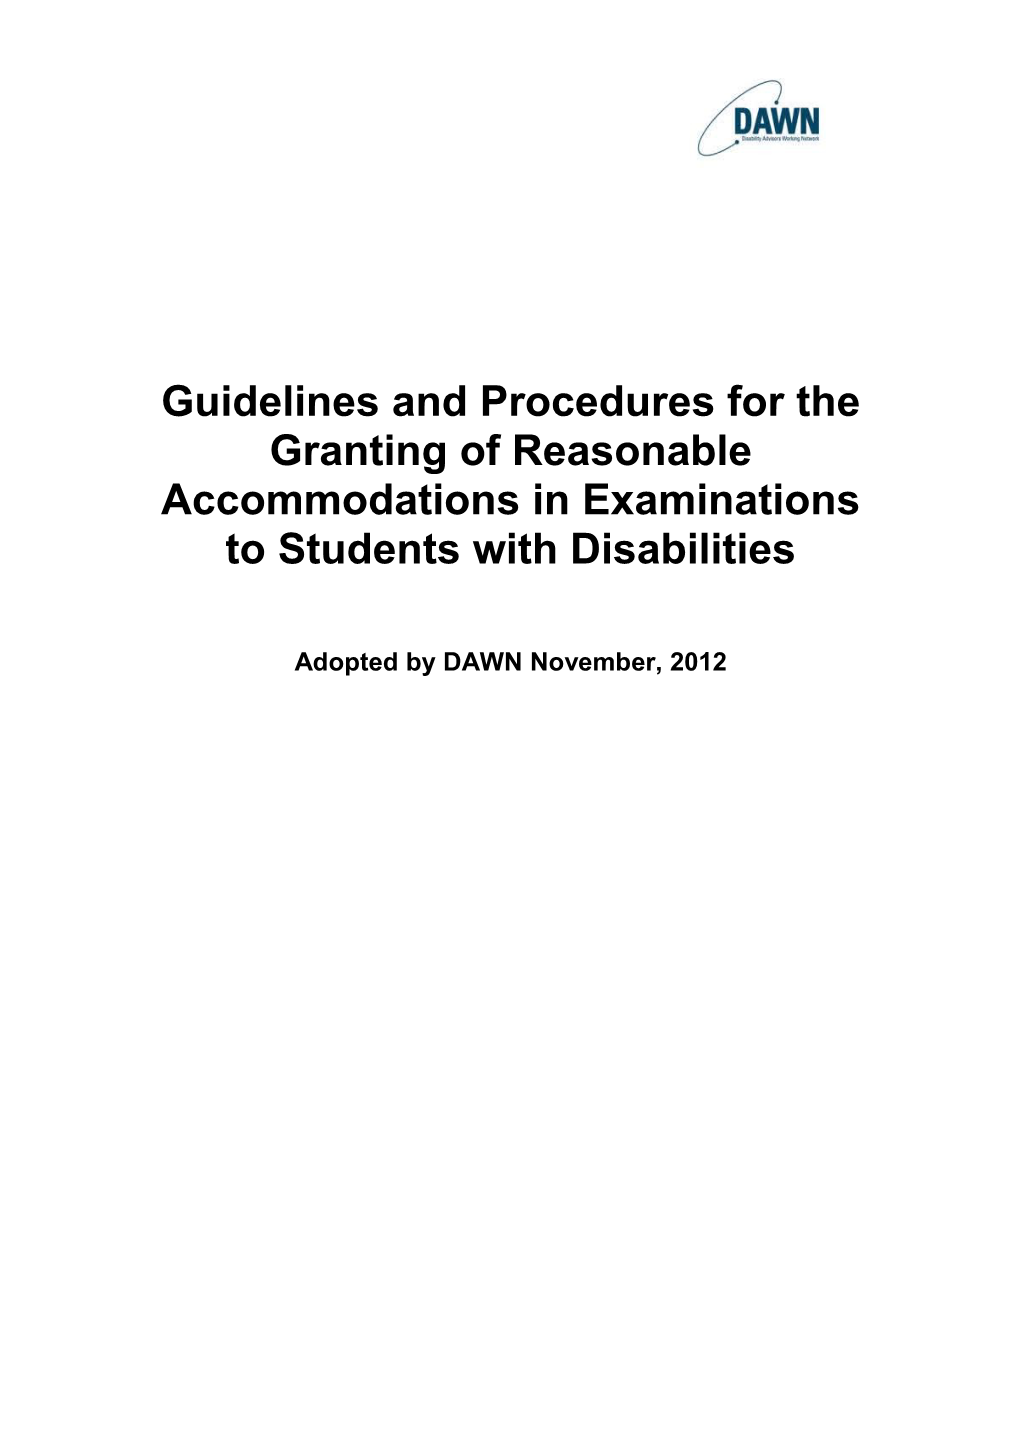 Guidelines and Procedures for the Granting of Reasonable Accommodations in Examinations